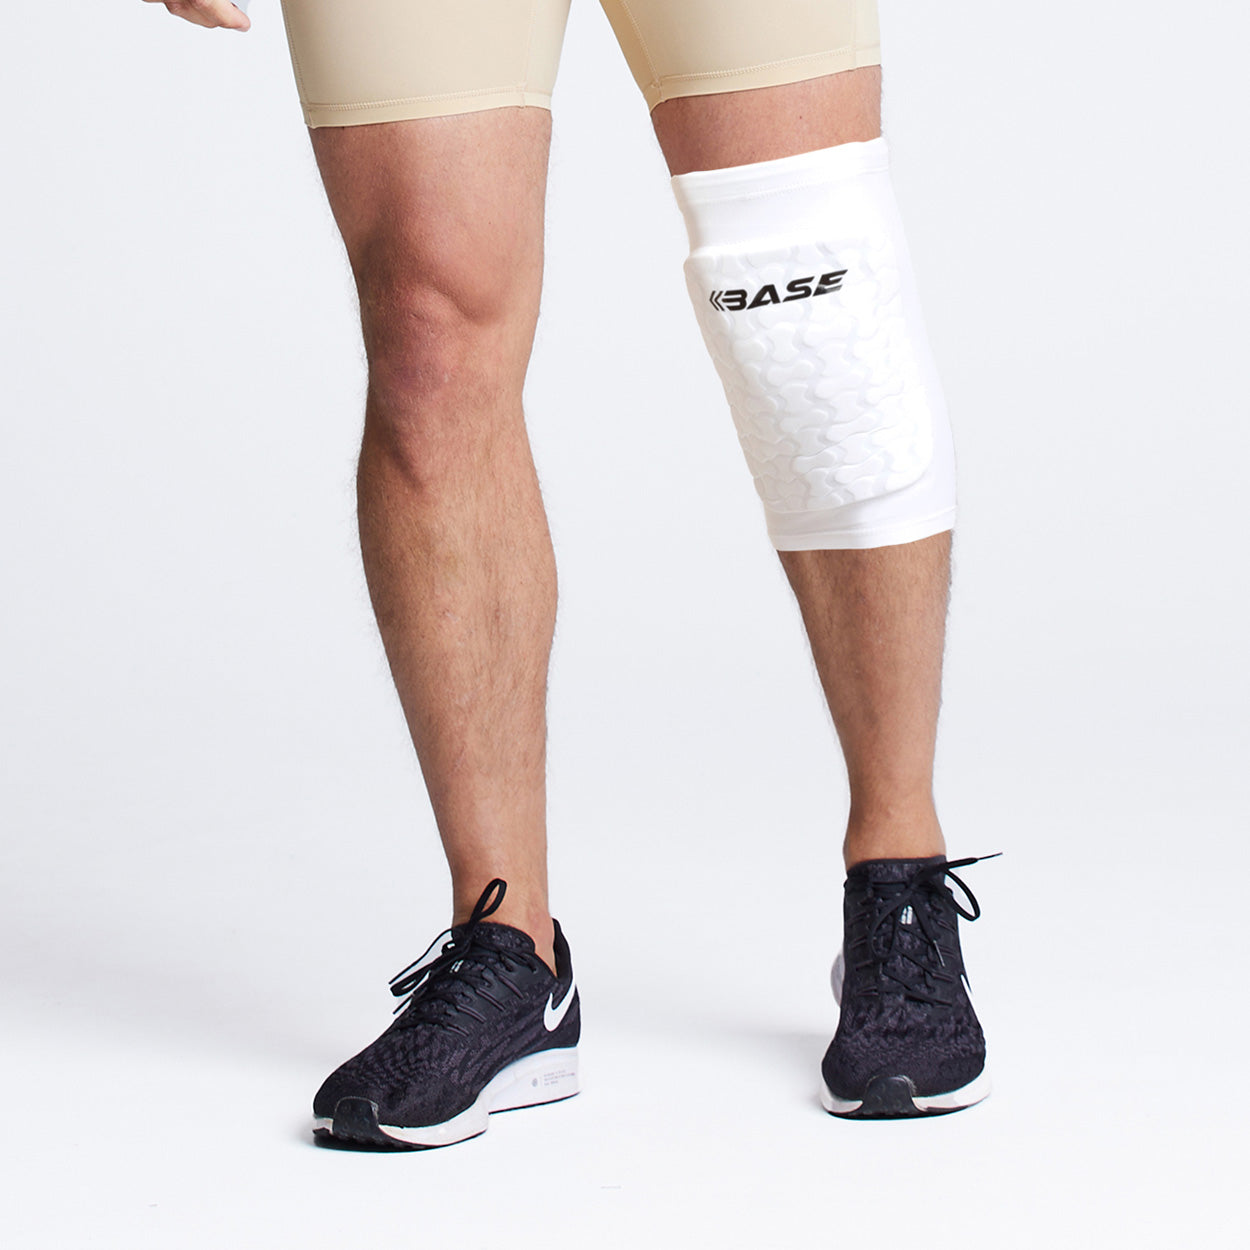 Court Padded Knee Guard (Pair)